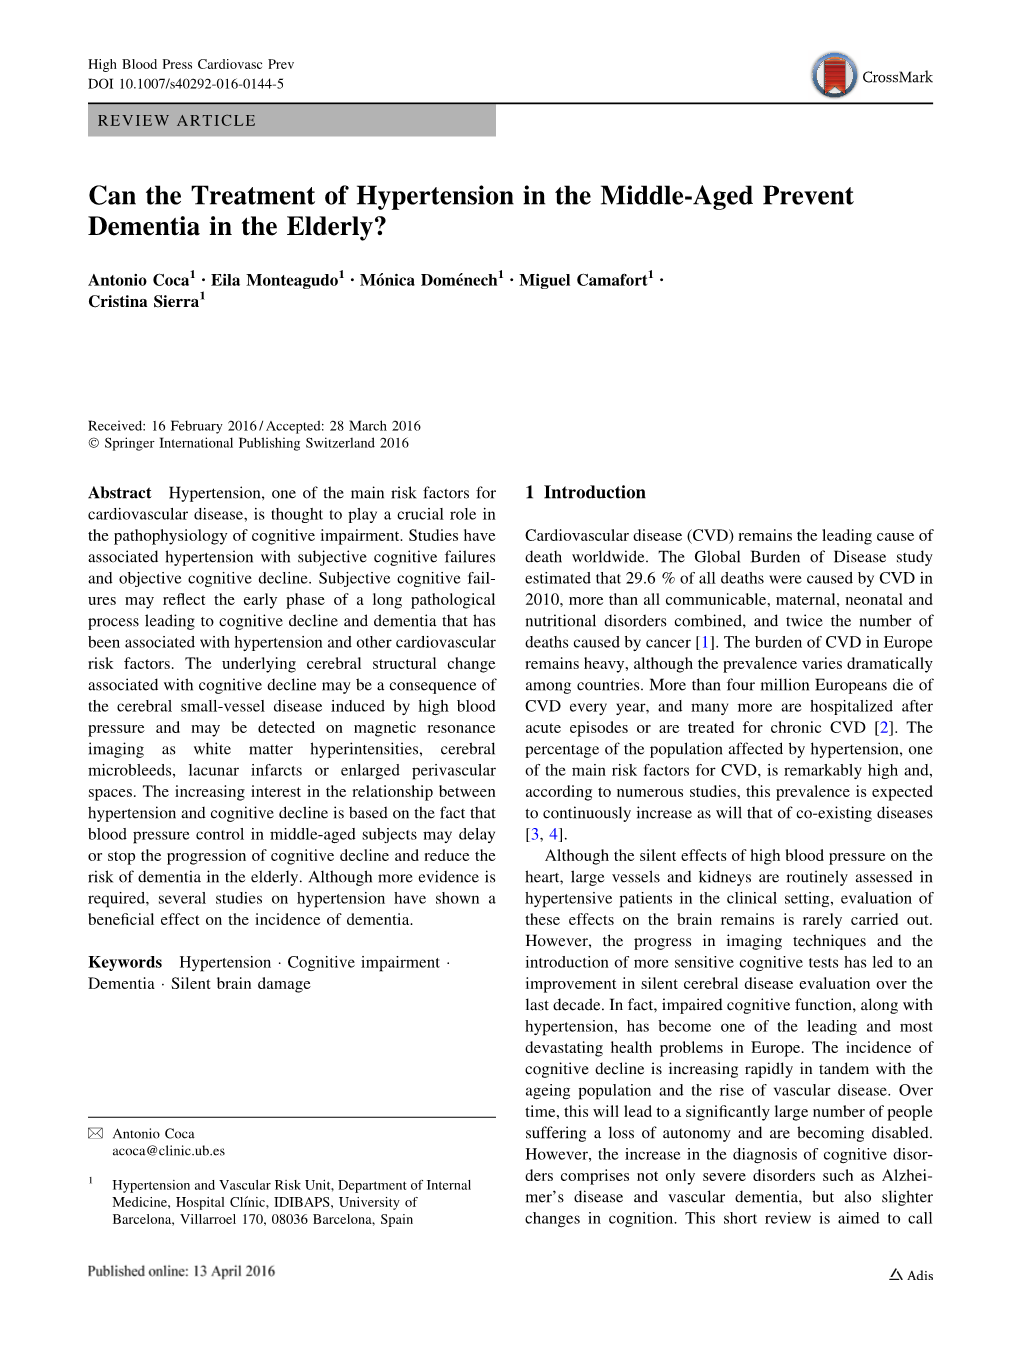 Can the Treatment of Hypertension in the Middle-Aged Prevent Dementia in the Elderly?